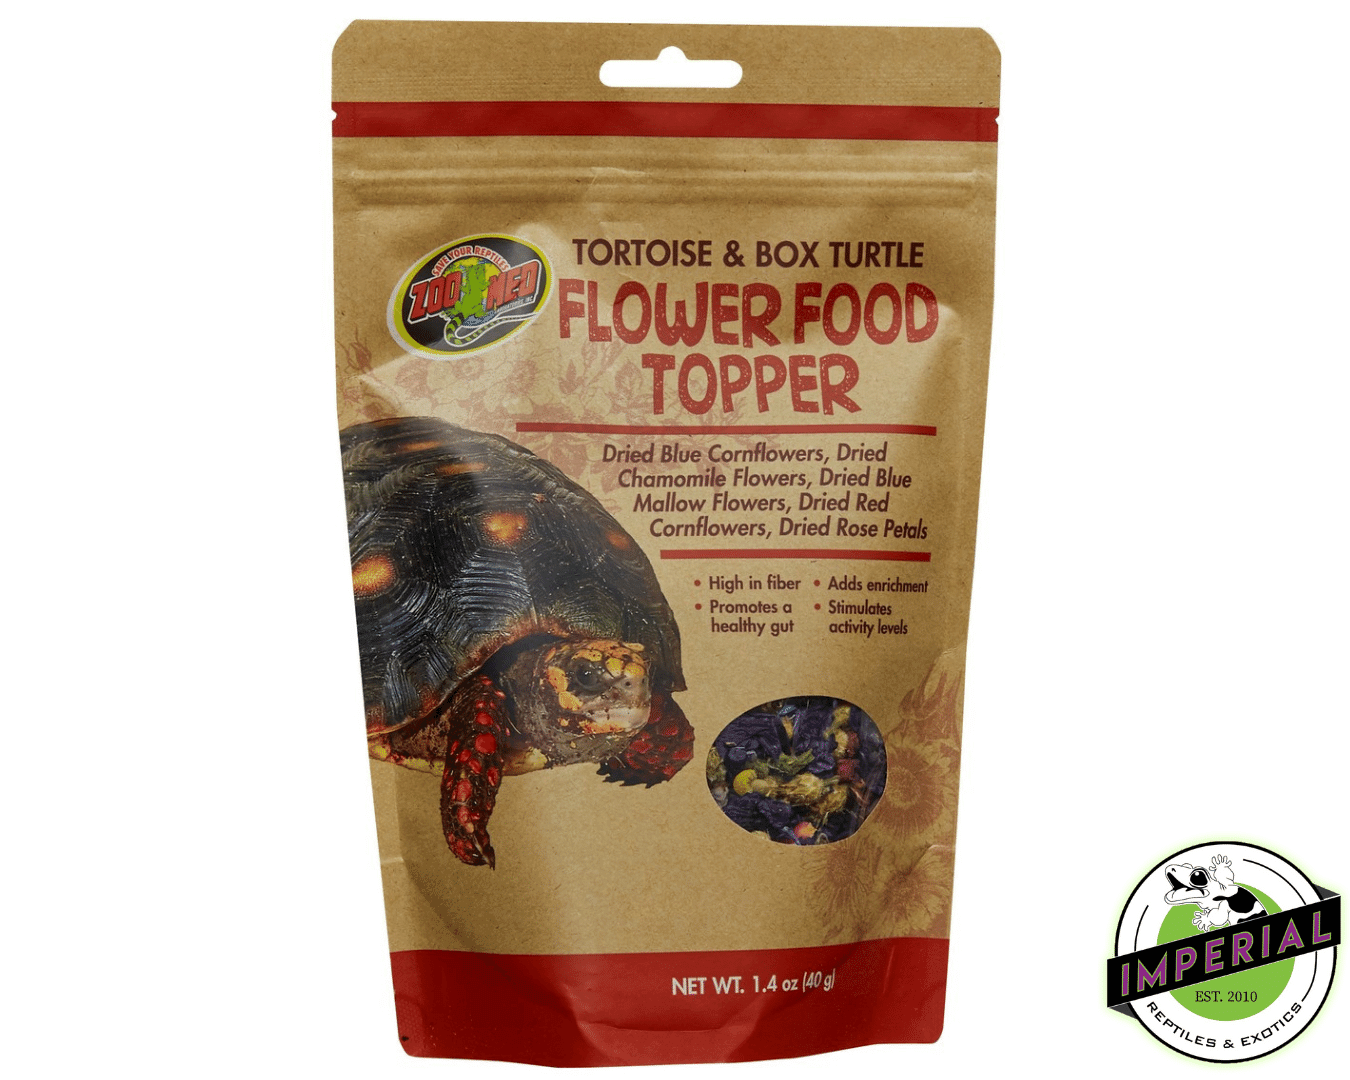 buy tortoise and box turtle blower food topper for sale online, cheap reptile supplies near me